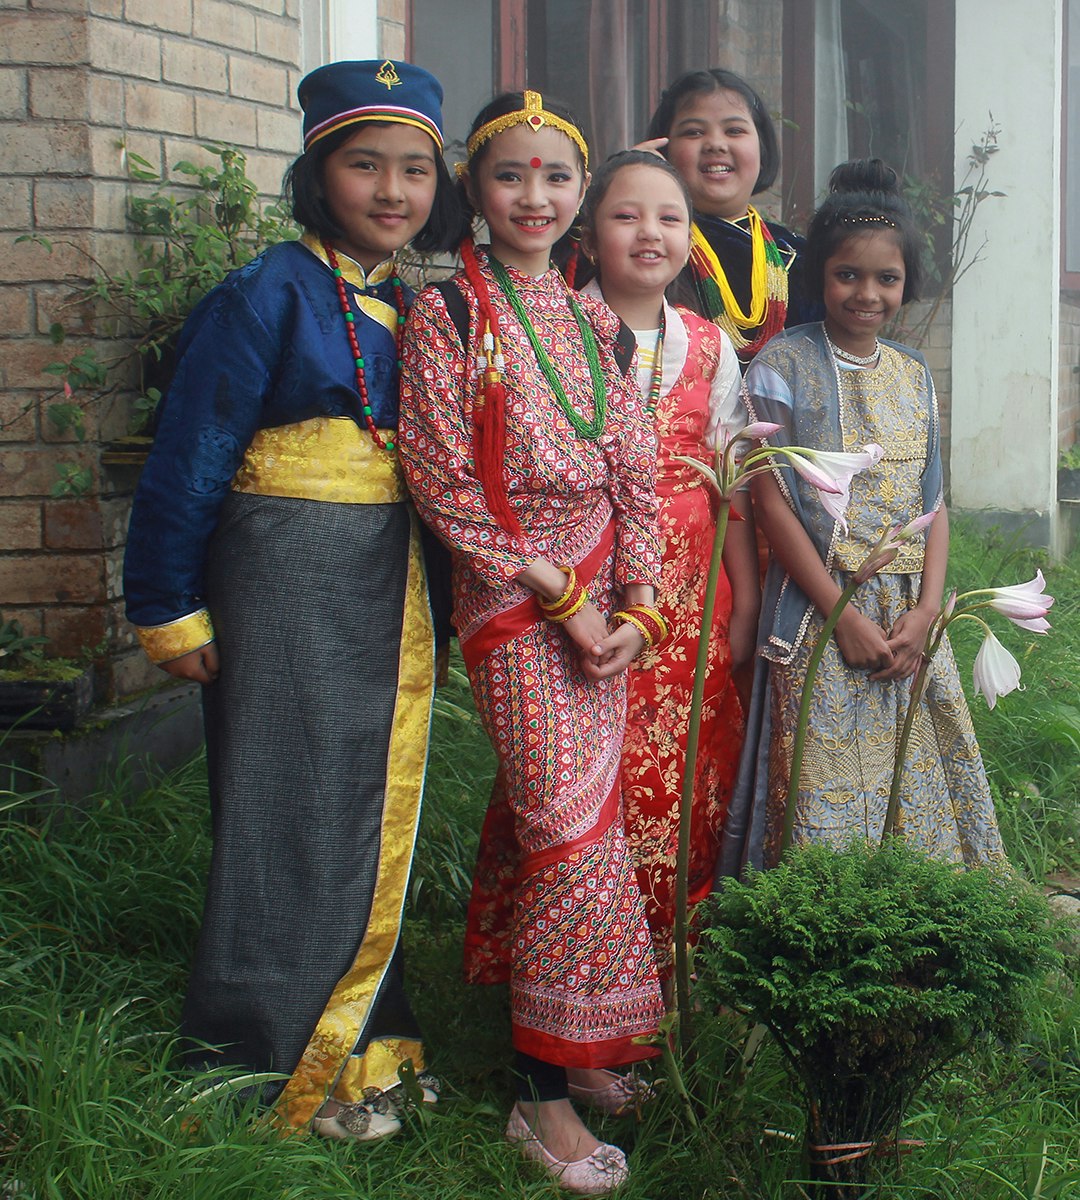 Celebrating Diversity: Five young students, representing different cultures and traditions, proudly showcase their vibrant traditional attire as they stand amidst the lush greenery and blooming flowers of our school.